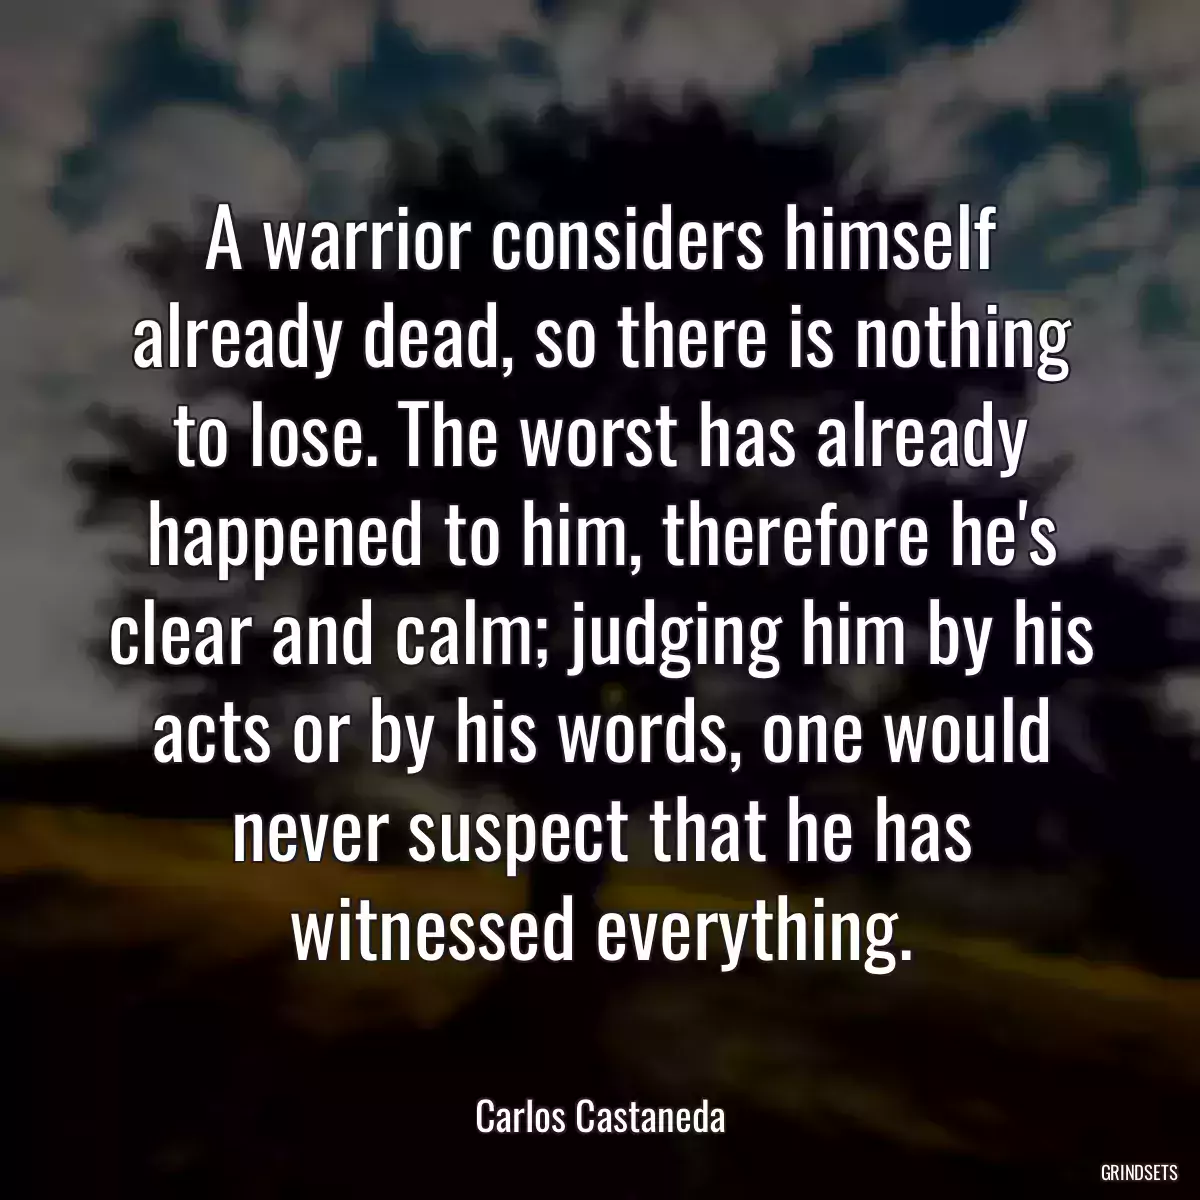 A warrior considers himself already dead, so there is nothing to lose. The worst has already happened to him, therefore he\'s clear and calm; judging him by his acts or by his words, one would never suspect that he has witnessed everything.